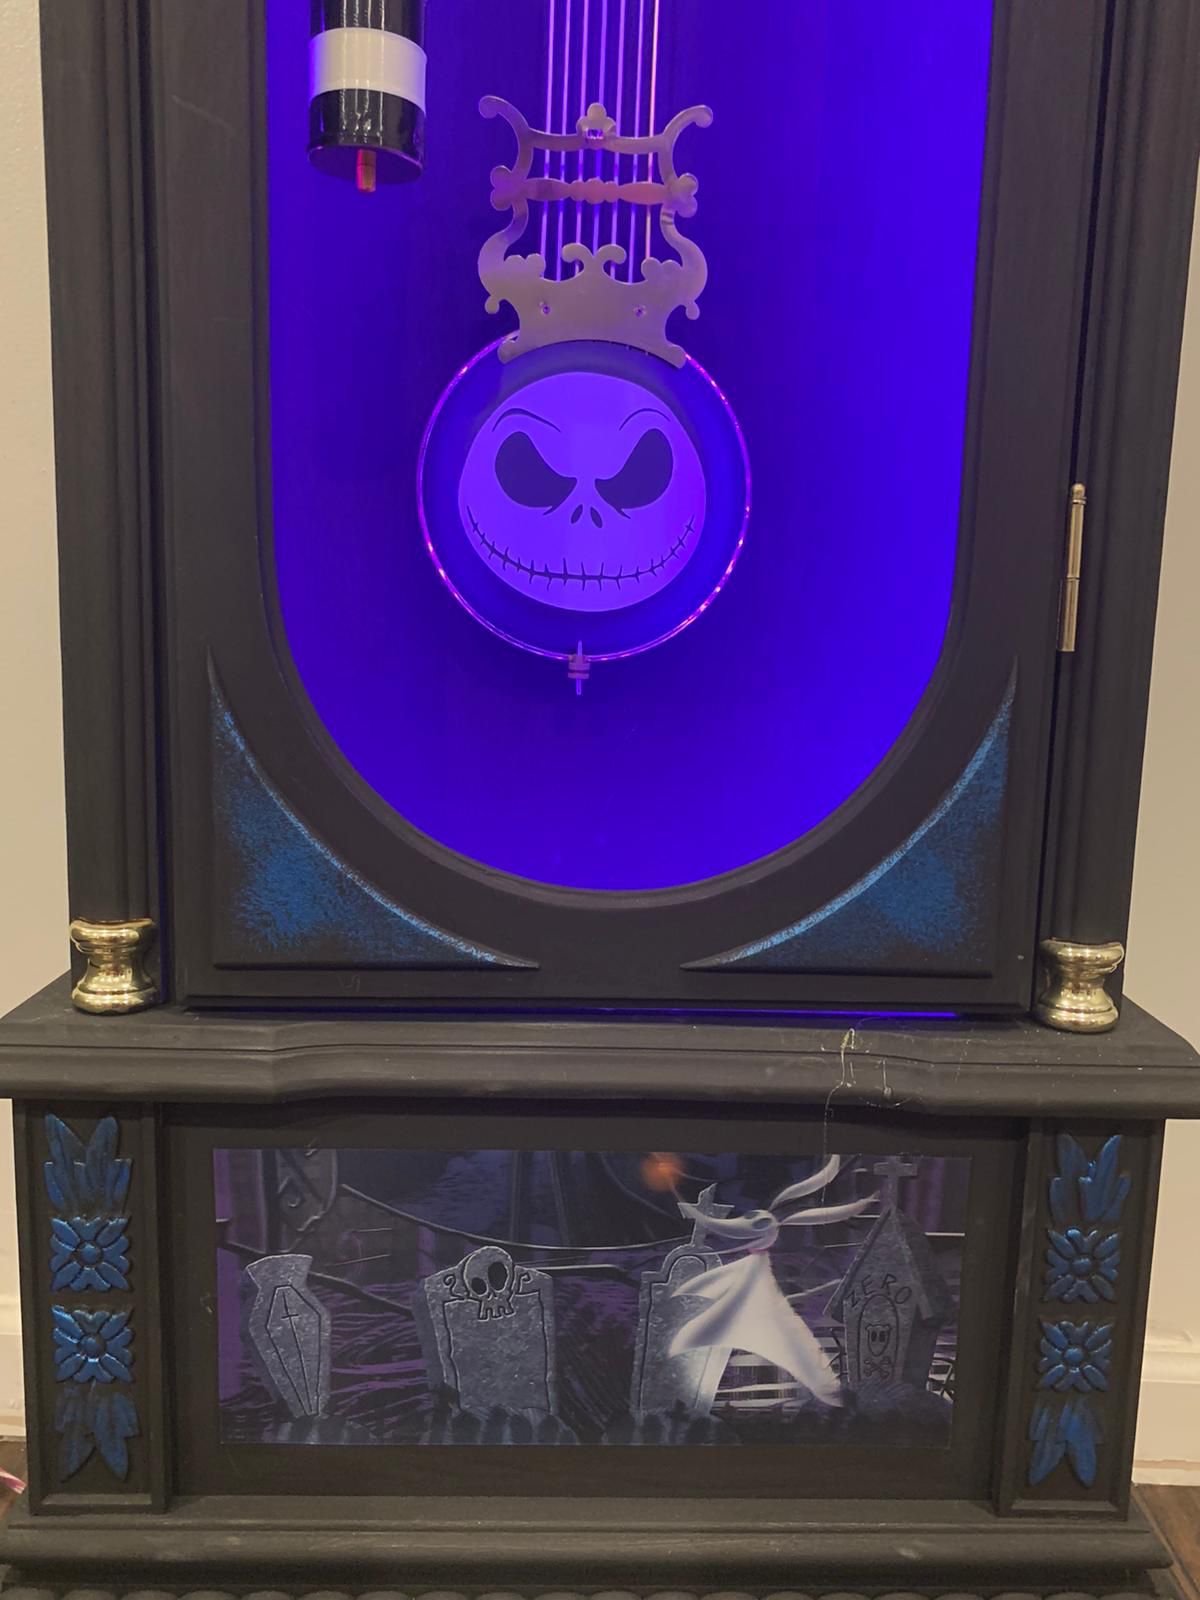 The nightmare before Christmas grandfather clock